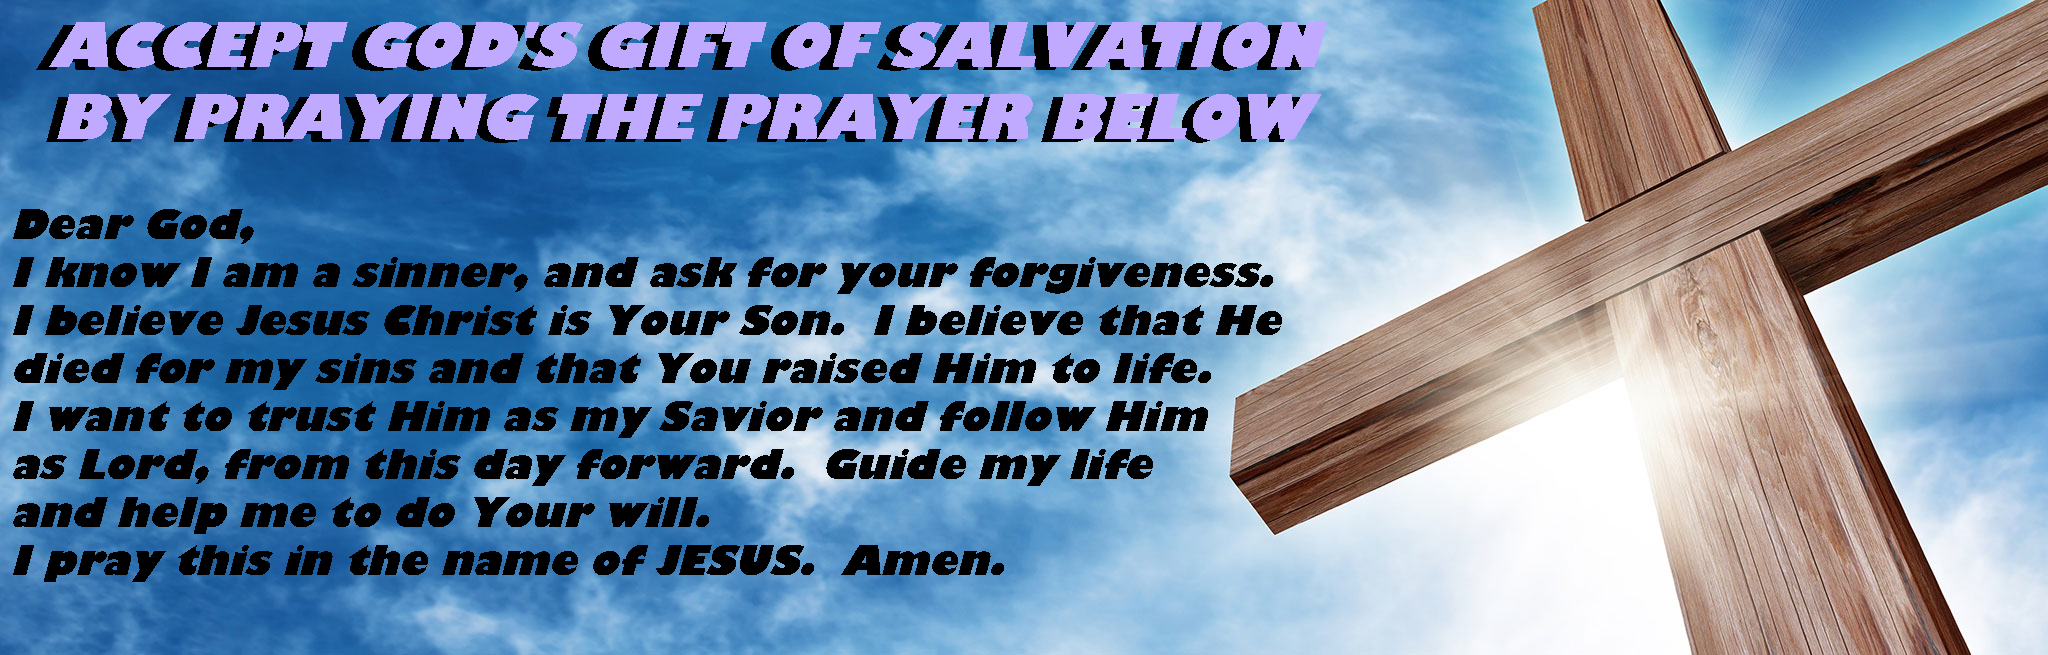 accept God's gift of salvation by praying the prayer below